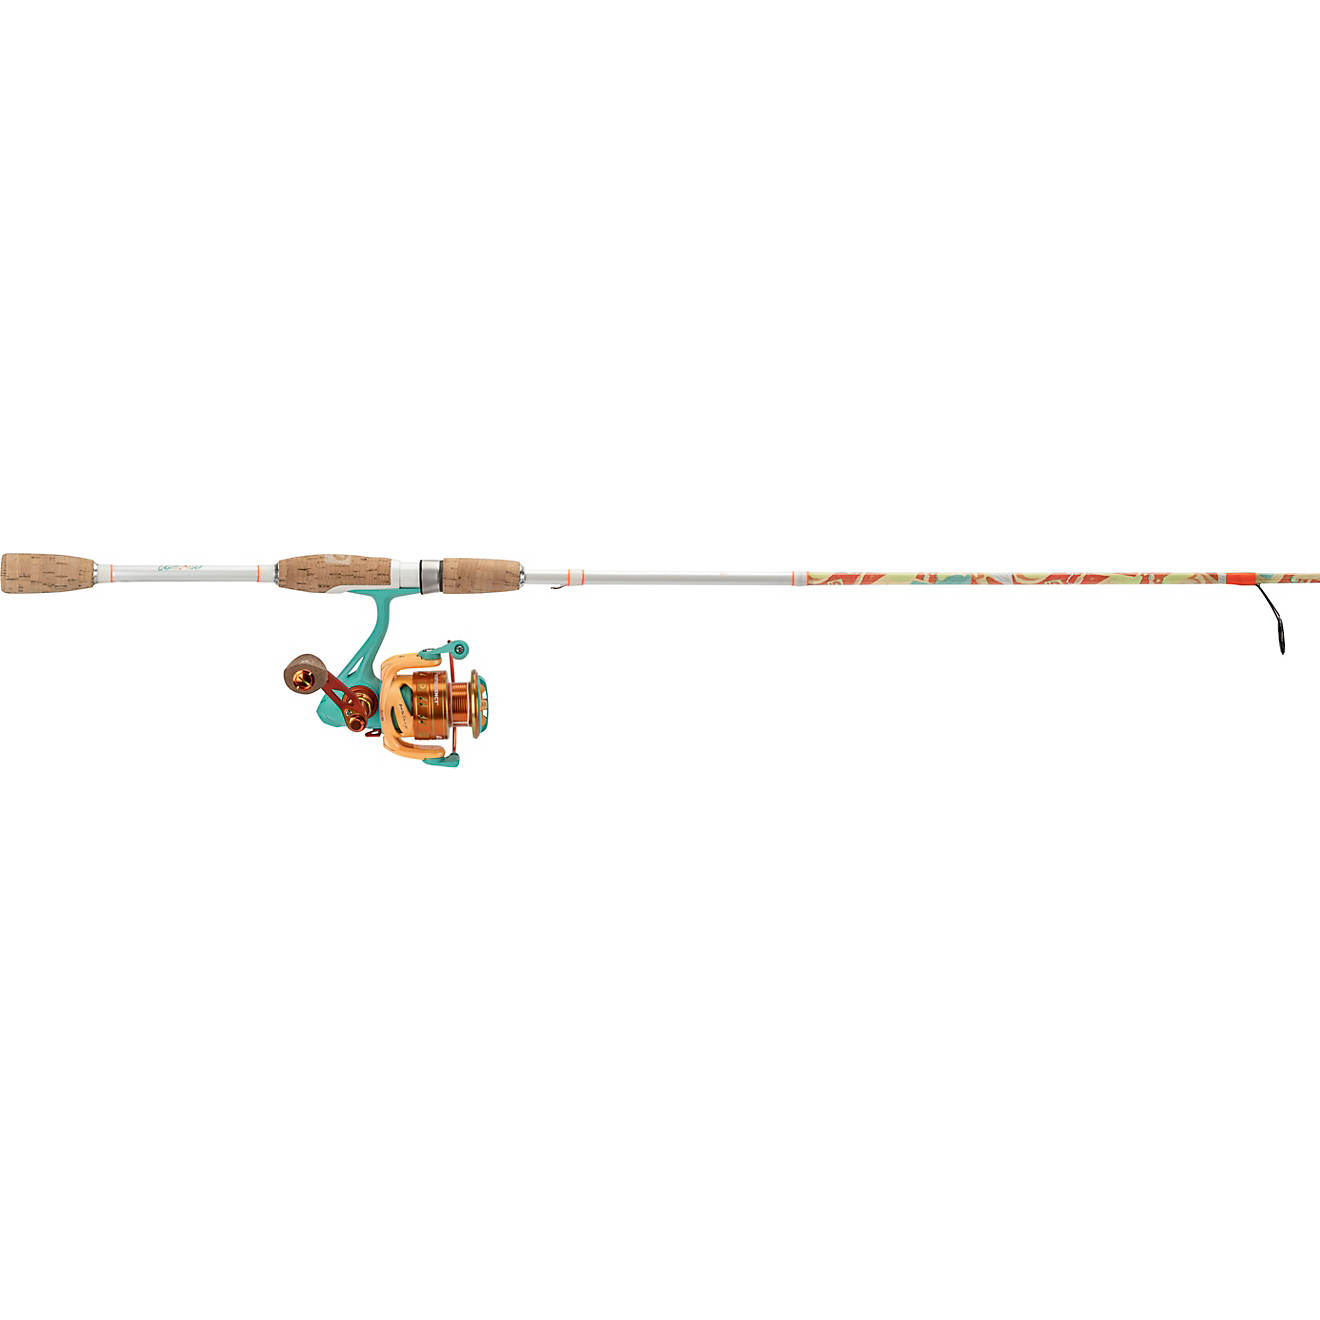 ProFISHiency Krazy Spinning Rod and Reel Combo